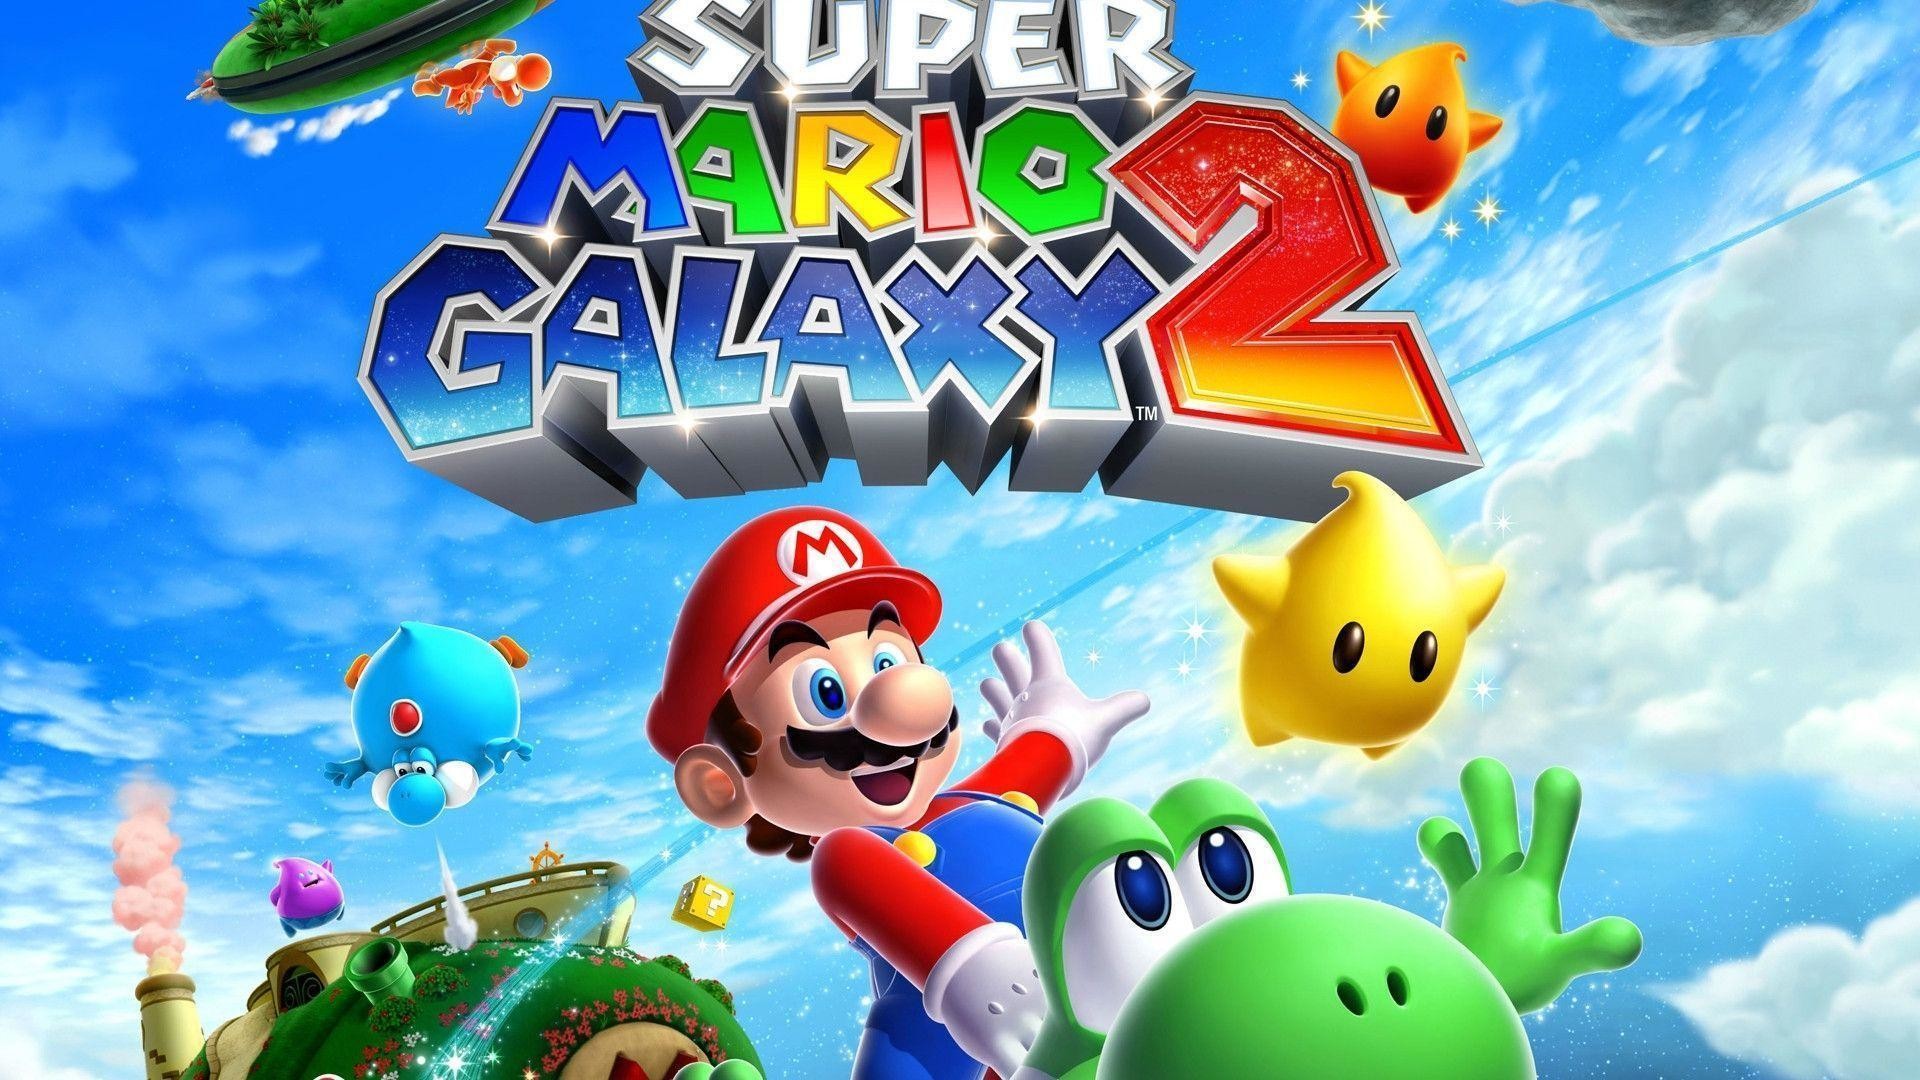 Captain Byte  on Twitter The full backgrounds seen on the box art for  Super Mario Galaxy and Super Mario Galaxy 2 respectively  httpstcoChOLSqXTE8  Twitter